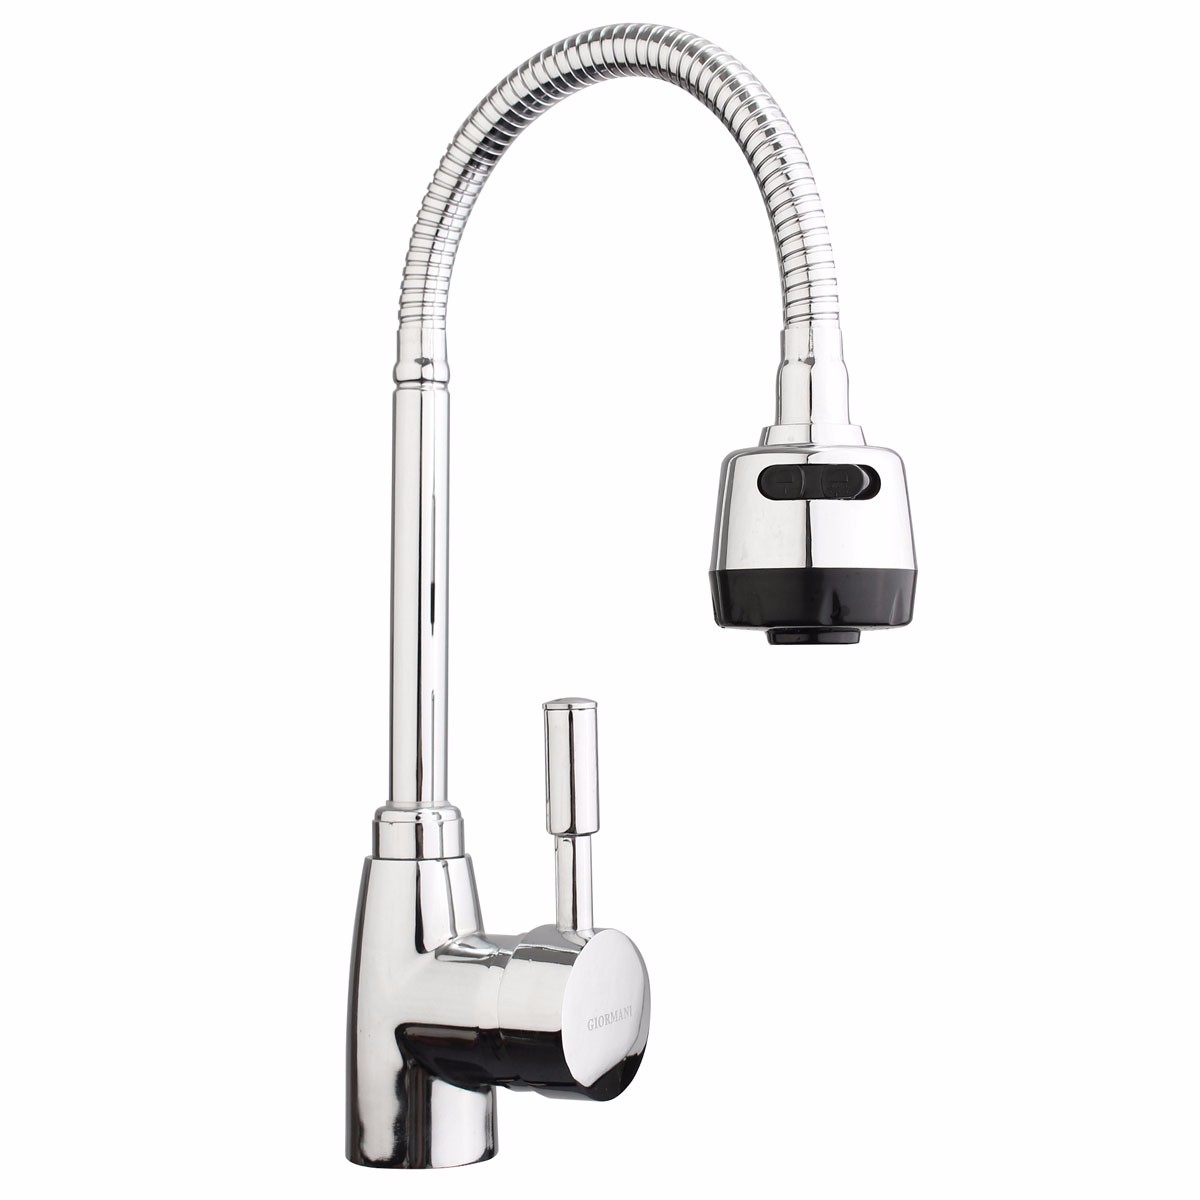 

Chrome Kitchen Sink Faucet 360° Rotate Spout Basin Bathroom Hot & Cold Water Mixer Tap